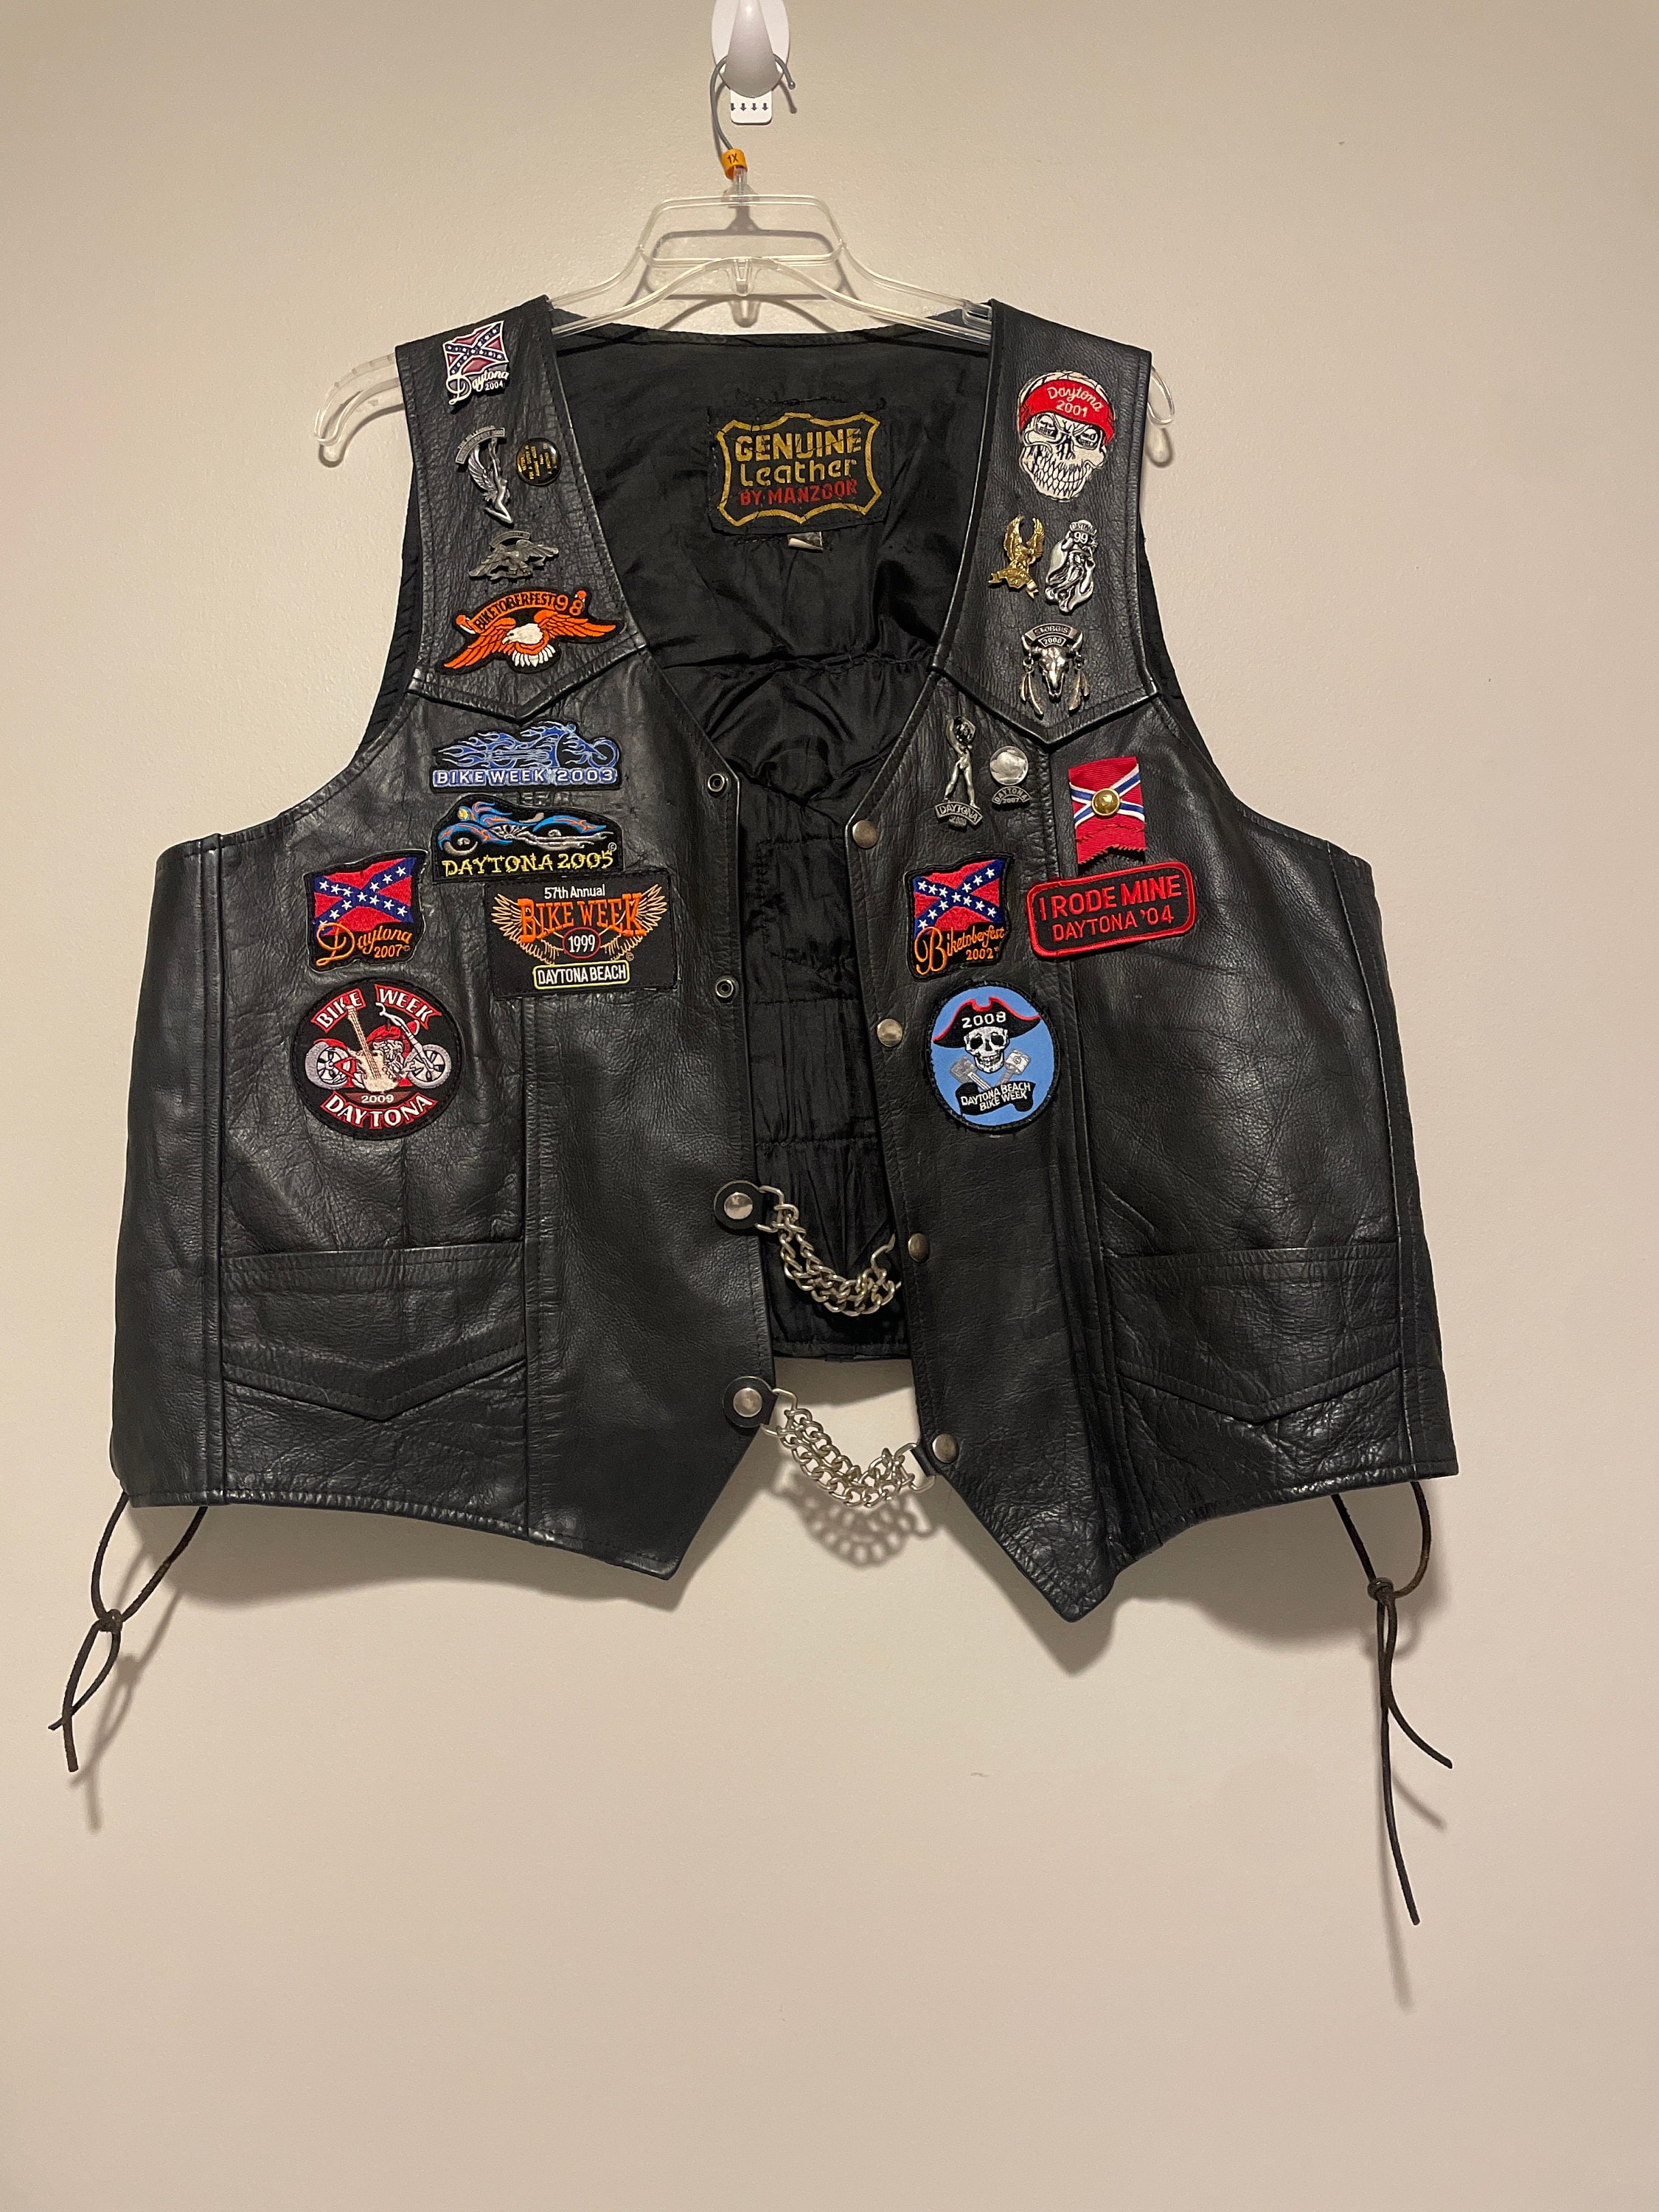 Leather Biker Vest with Patches & Pins Made in USA Size Large